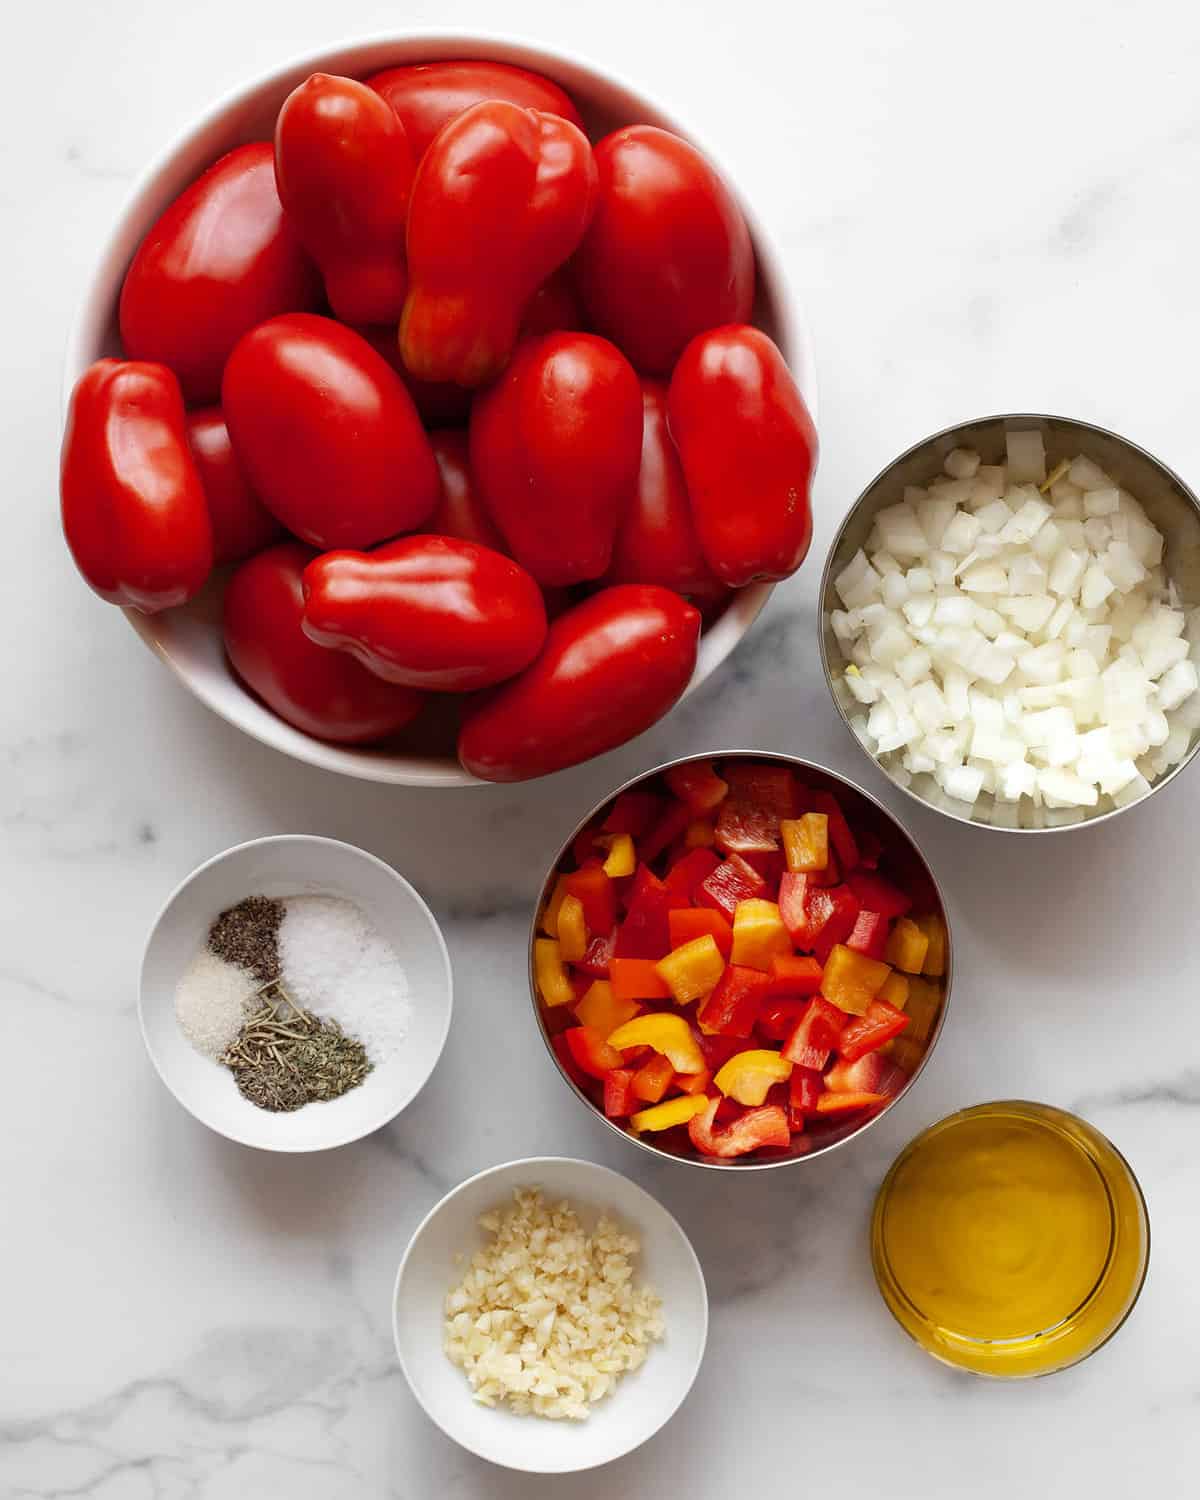 Ingredients including tomatoes, onions, olive oil, garlic, spices and bell peppers.